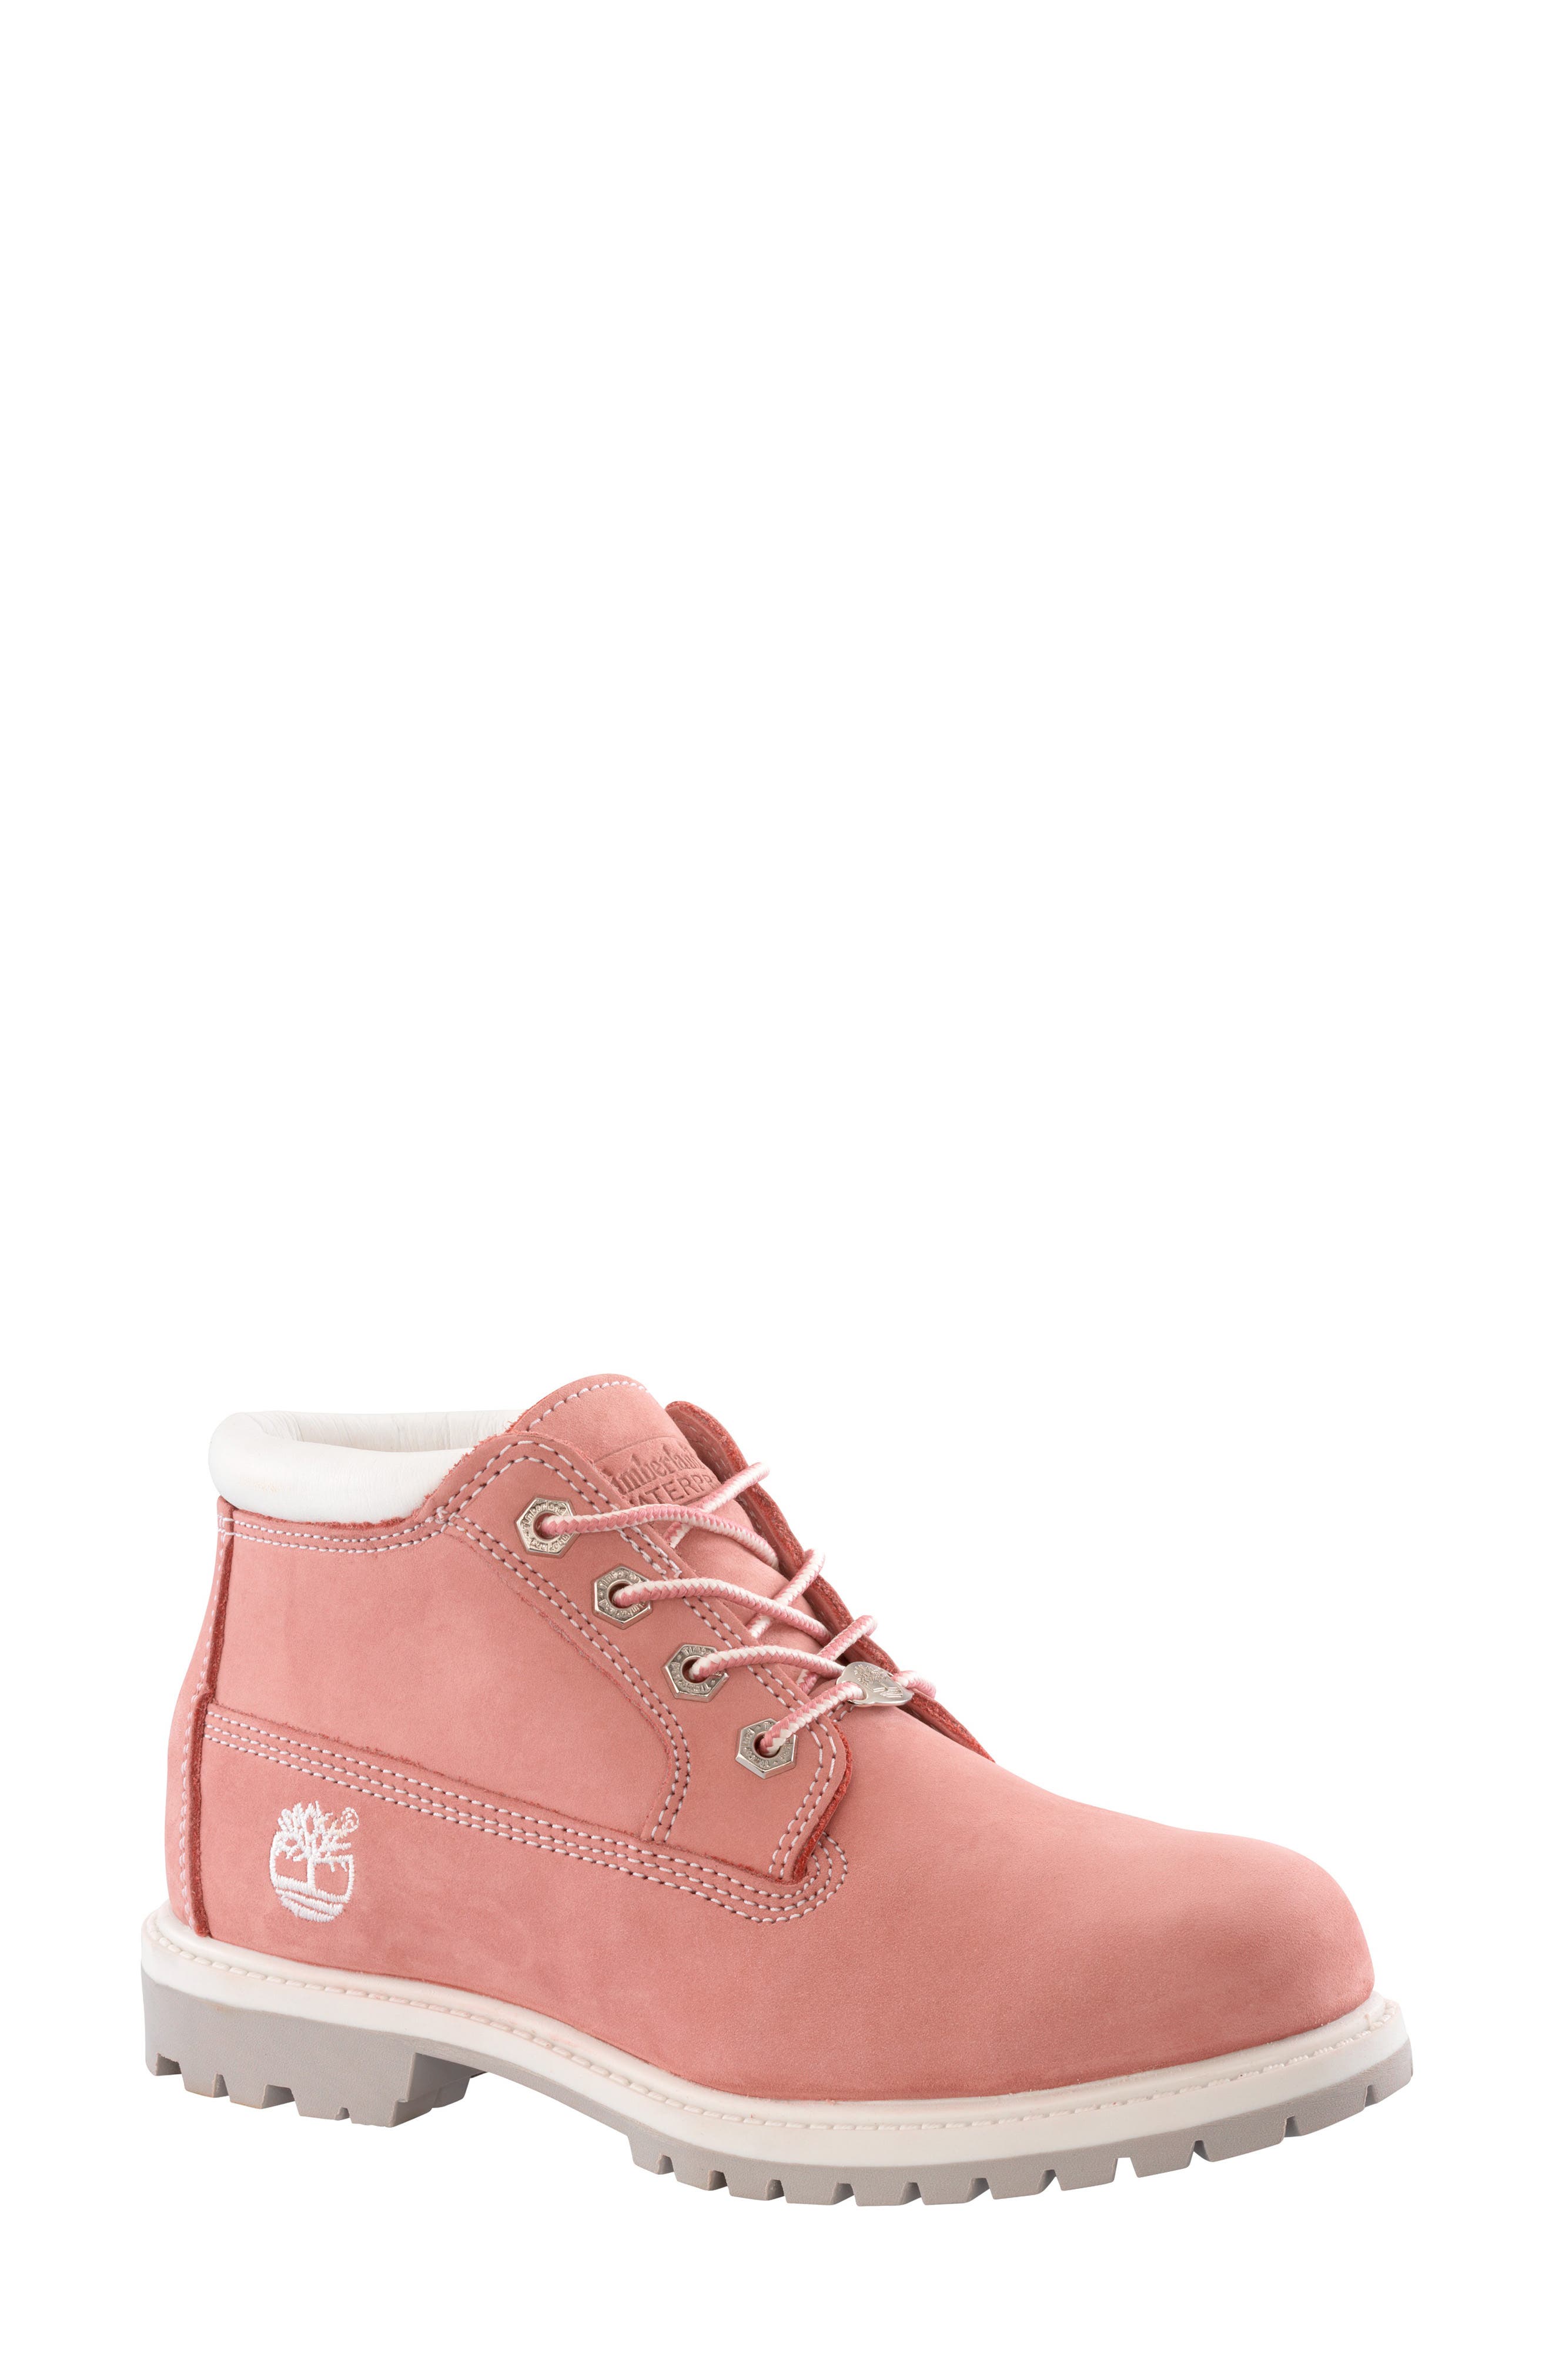 Women's Pink Timberland Shoes | Nordstrom